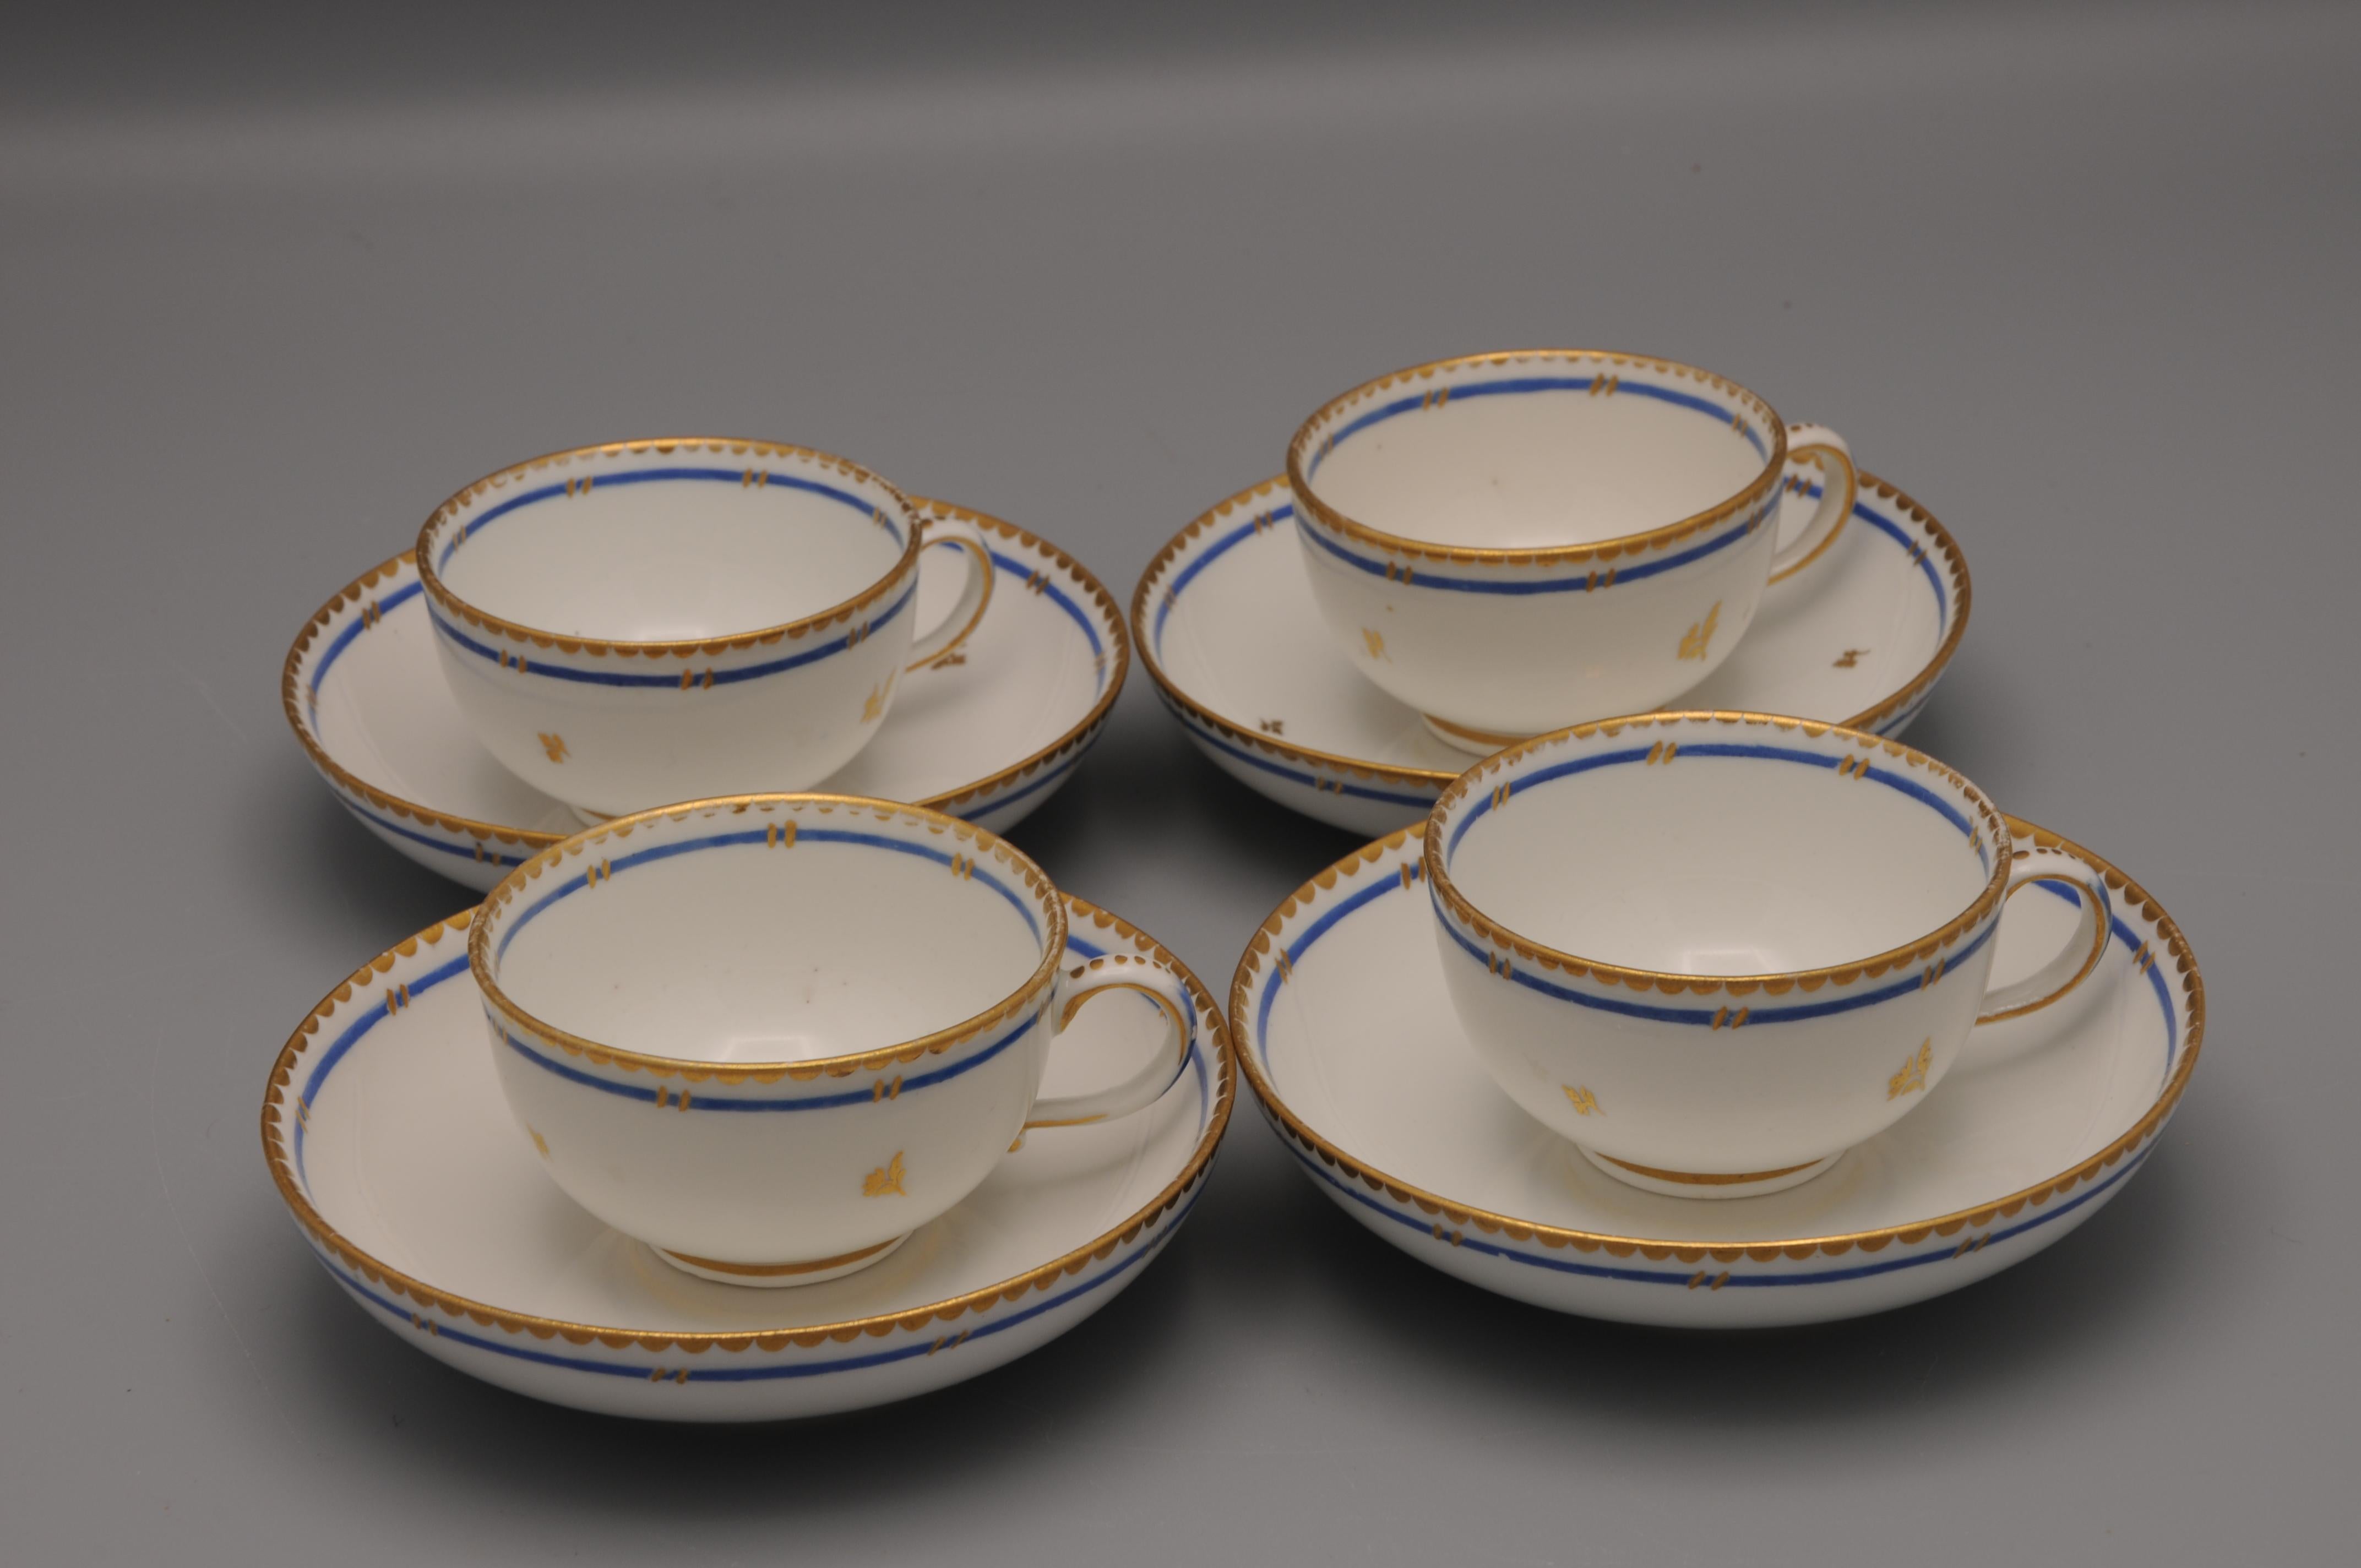 Vienna porcelain - 4 cups and saucers, 1781 For Sale 4